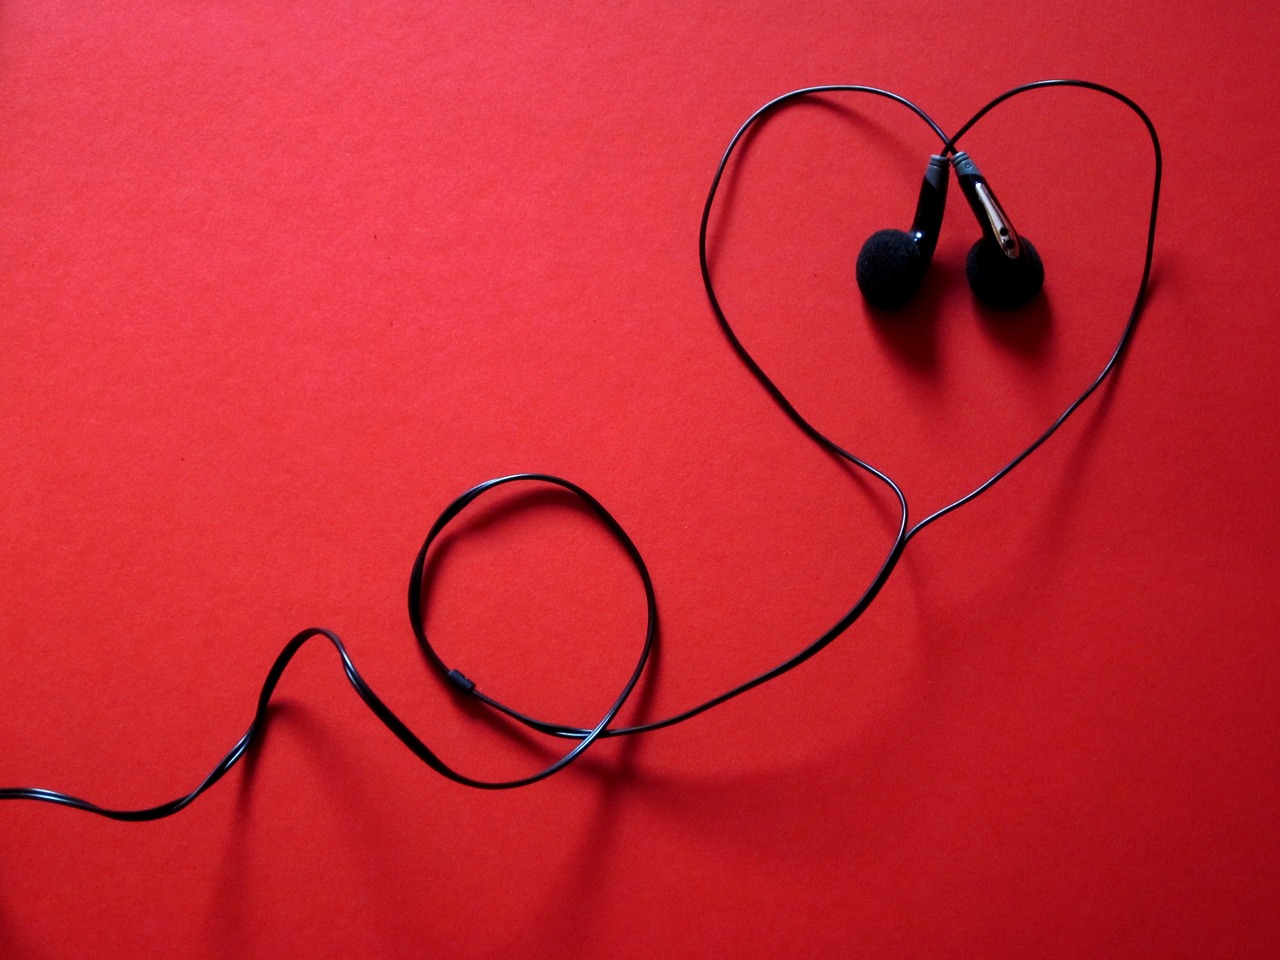 a pair of headphones in the shape of a heart, istockphoto, red wallpaper background, small gadget, stringy